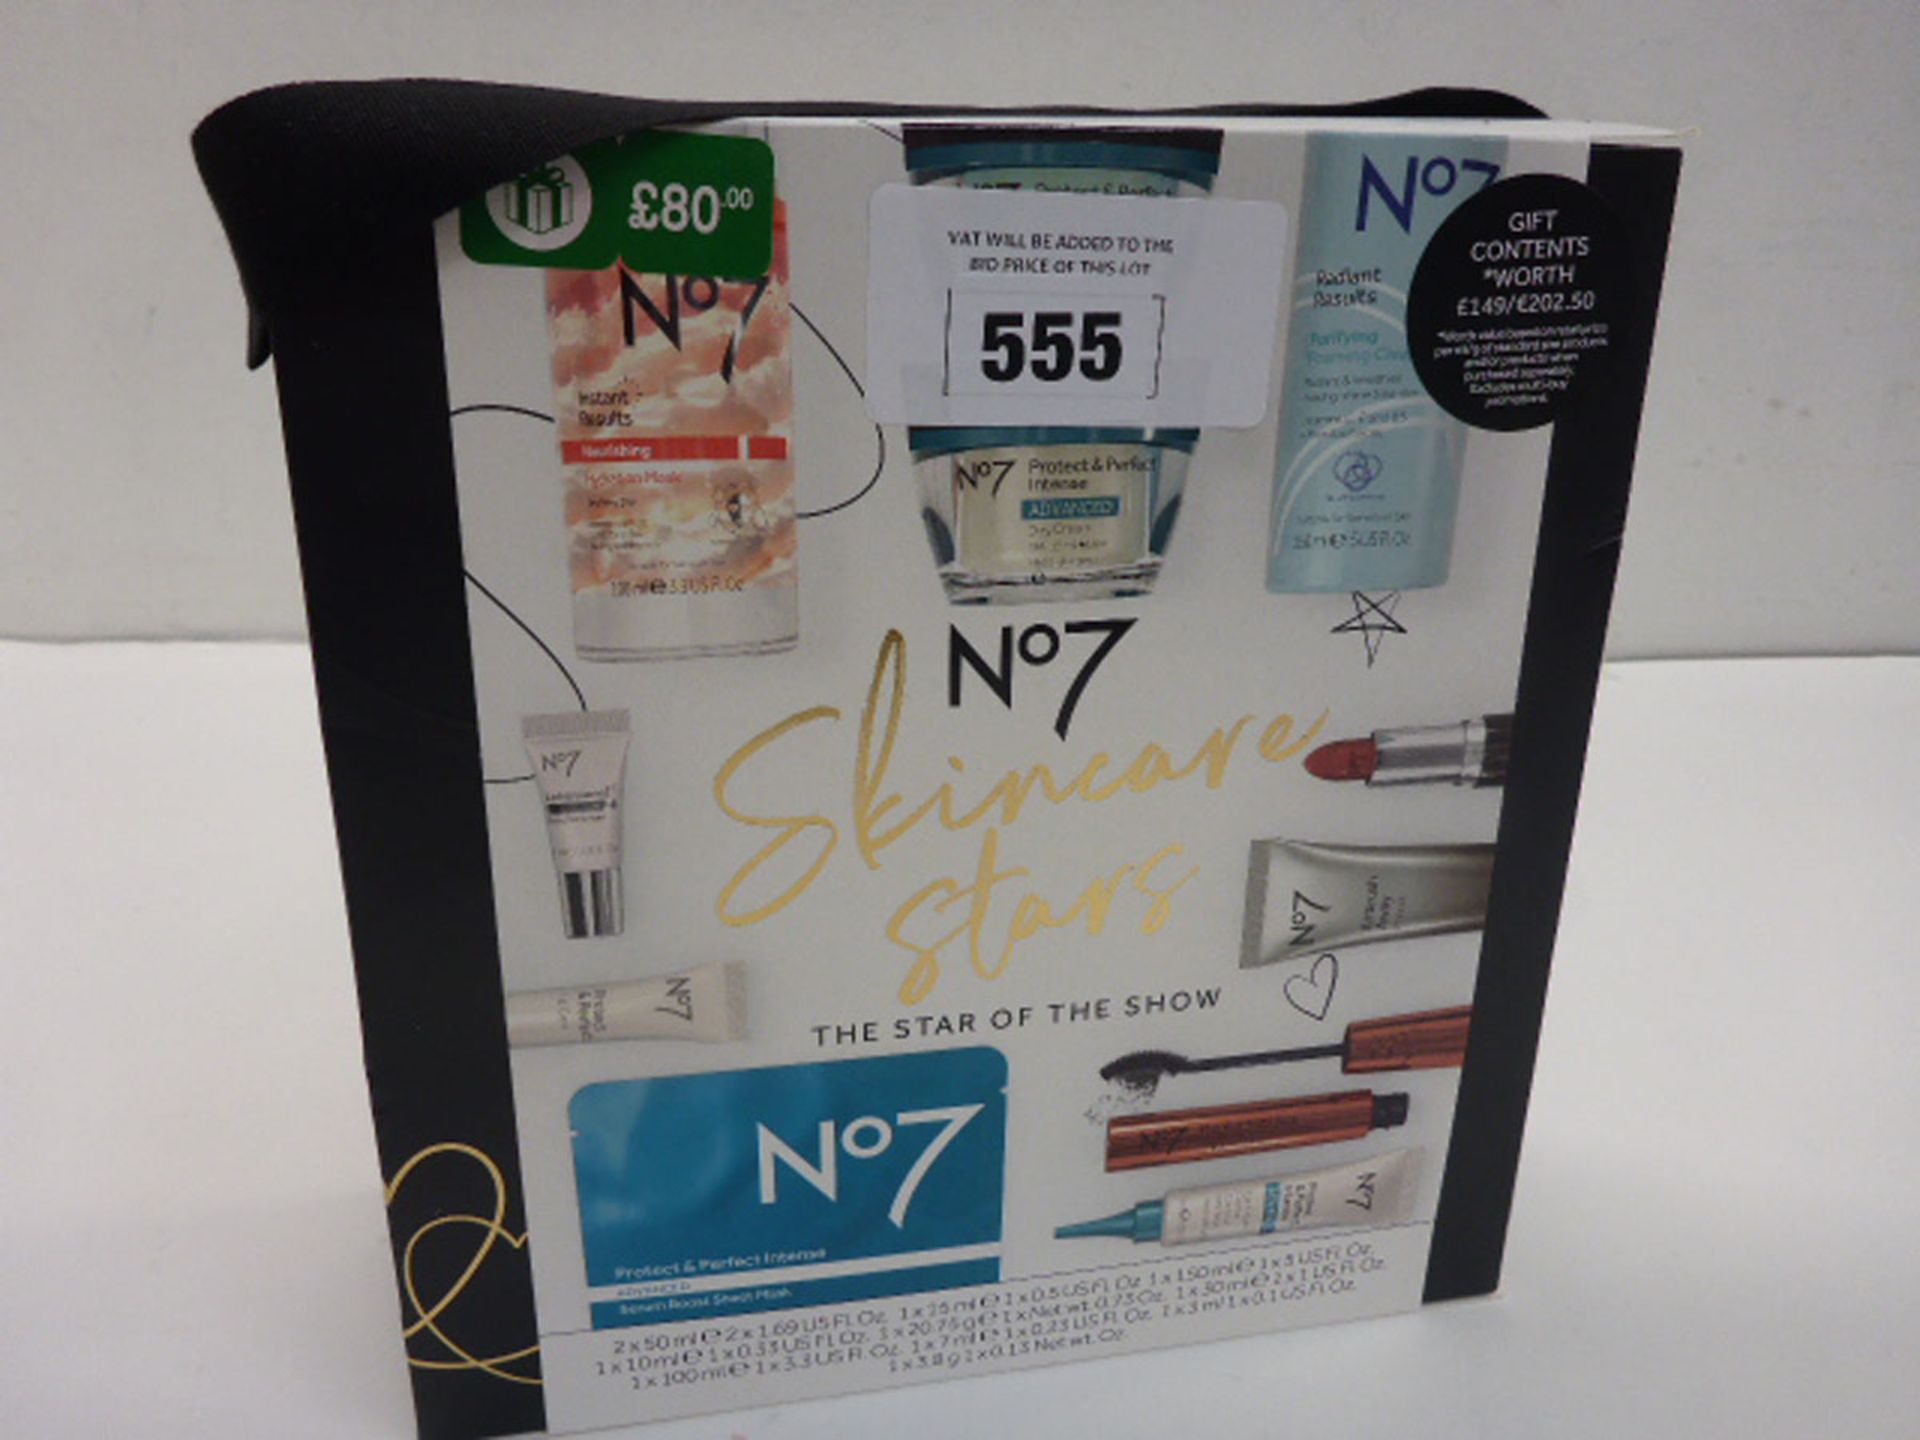 No. 7 Skincare Stars The Star of the Show beauty set